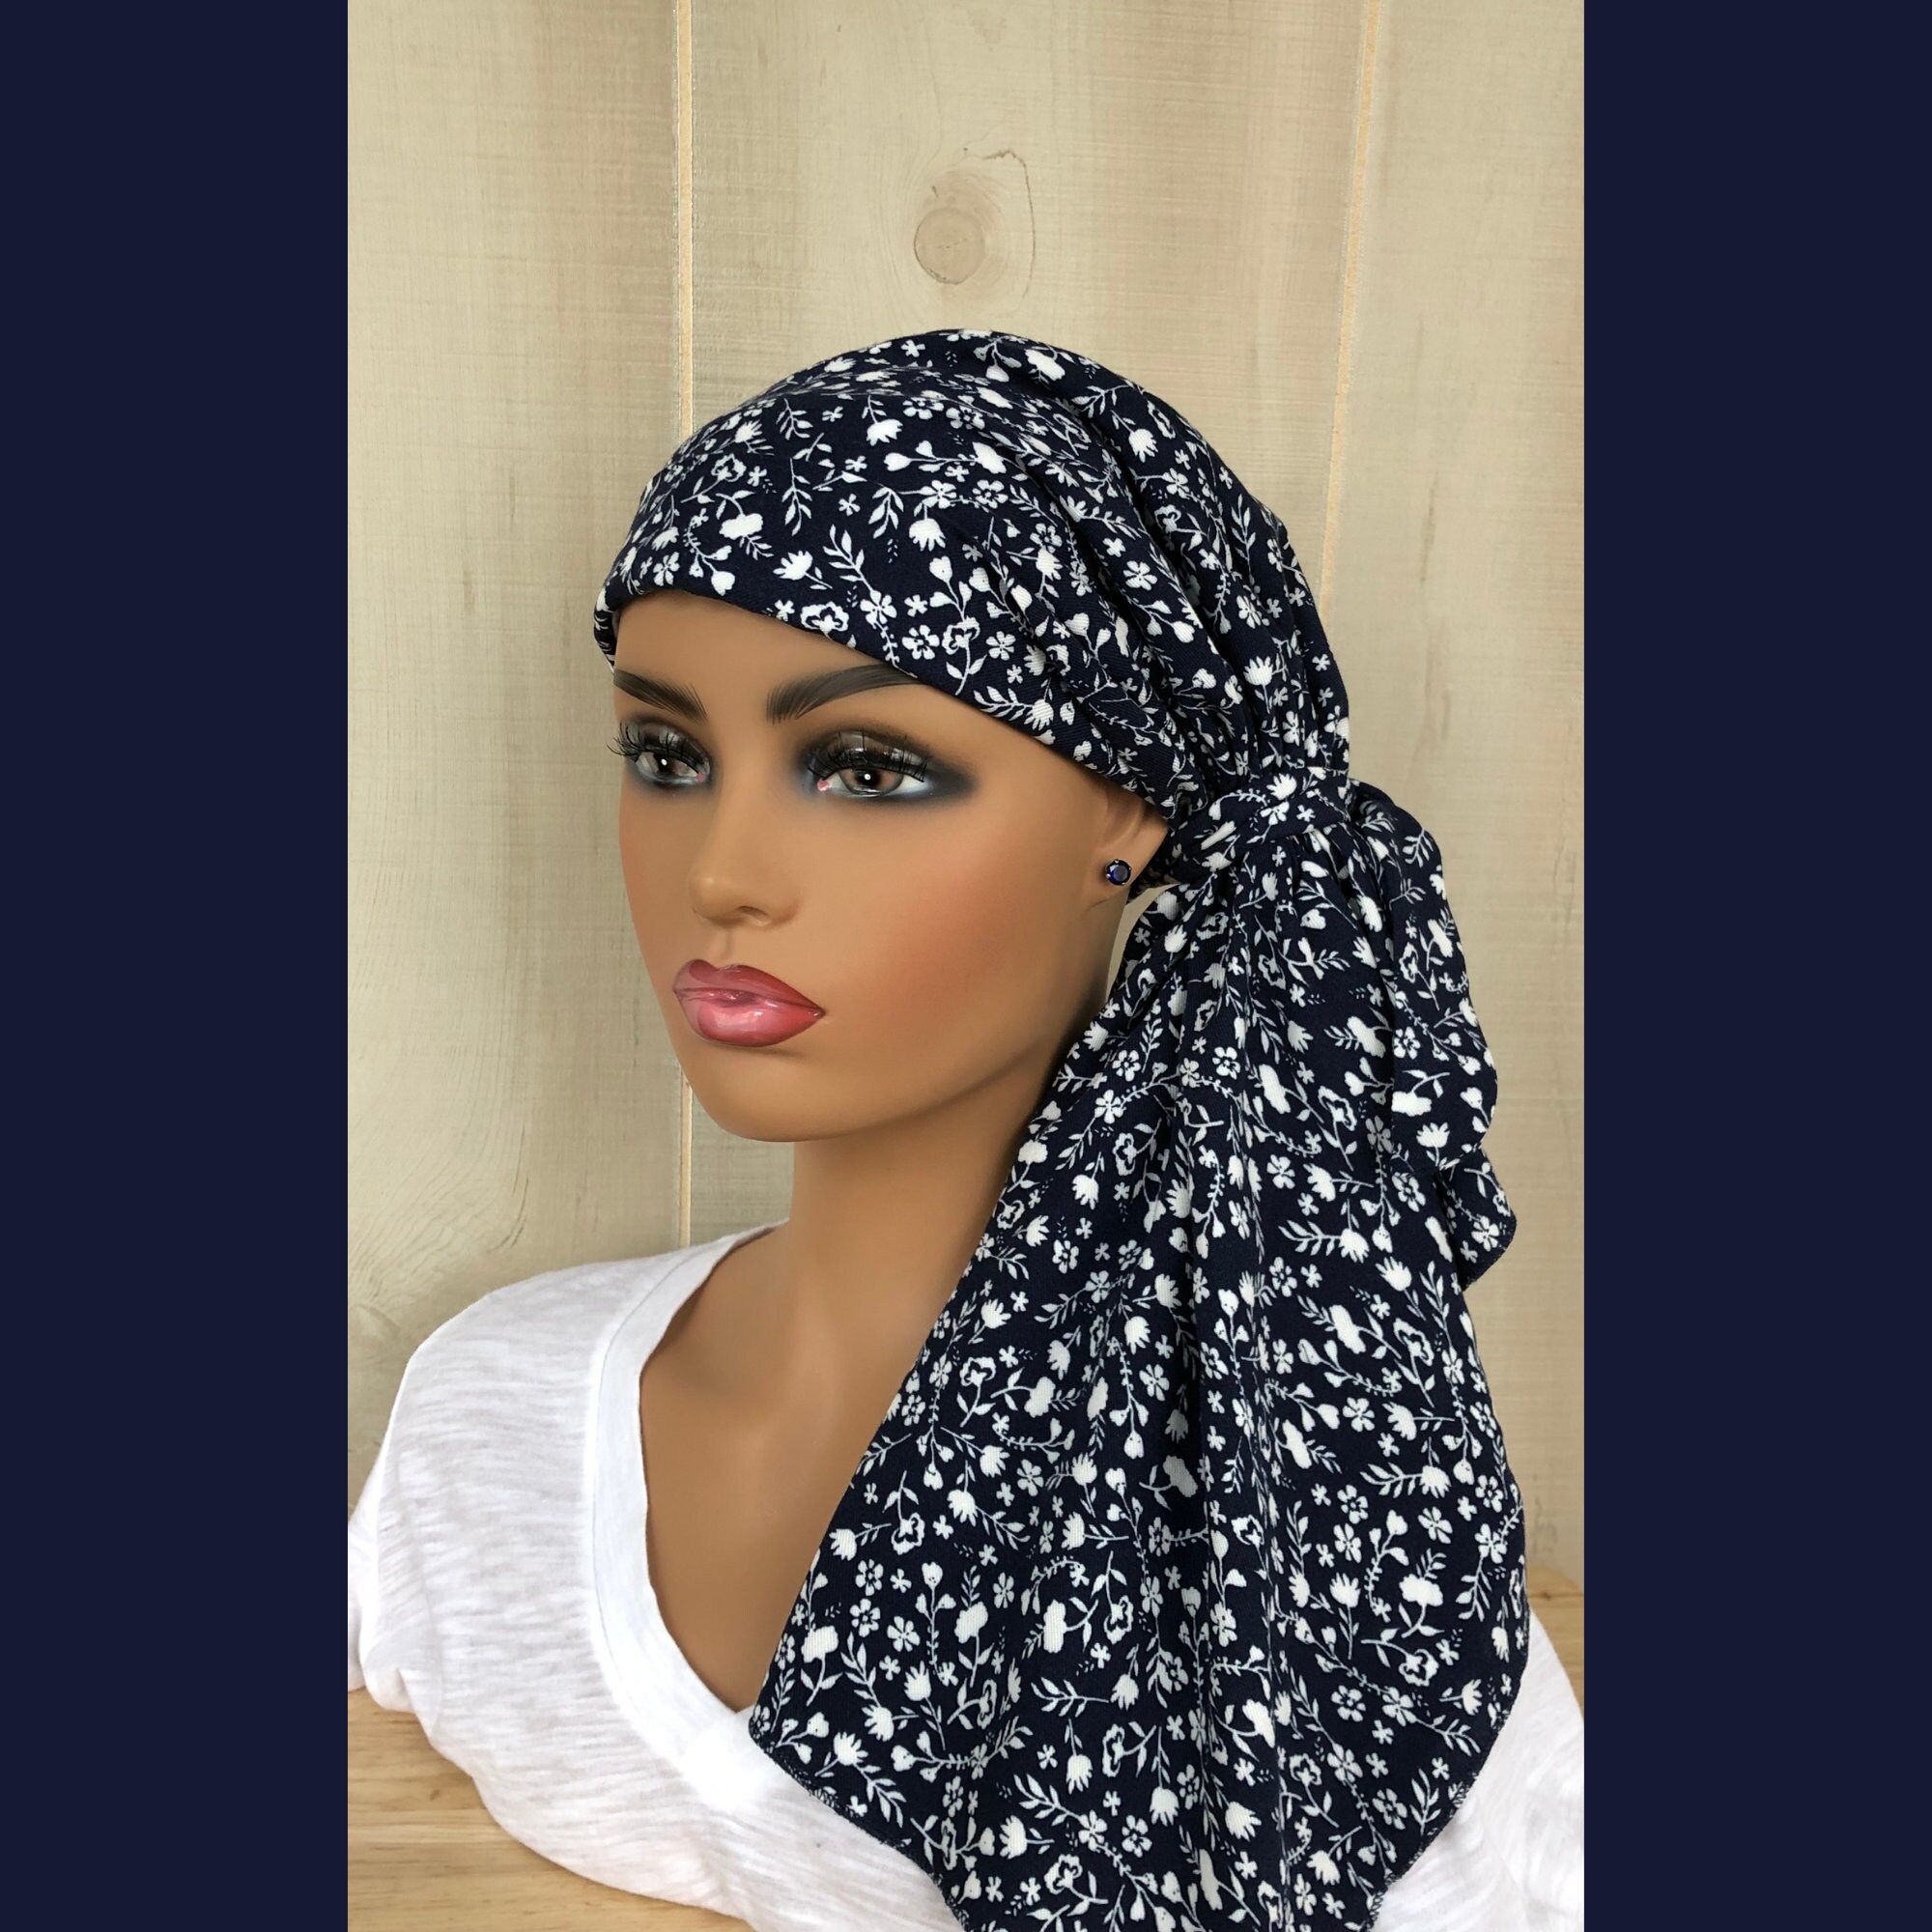 Navy Blue Pre-Tied Head Scarf For Women With Hair Loss, Chemo Headwear,  Adjustable Toggle, Breast Cancer Gifts,